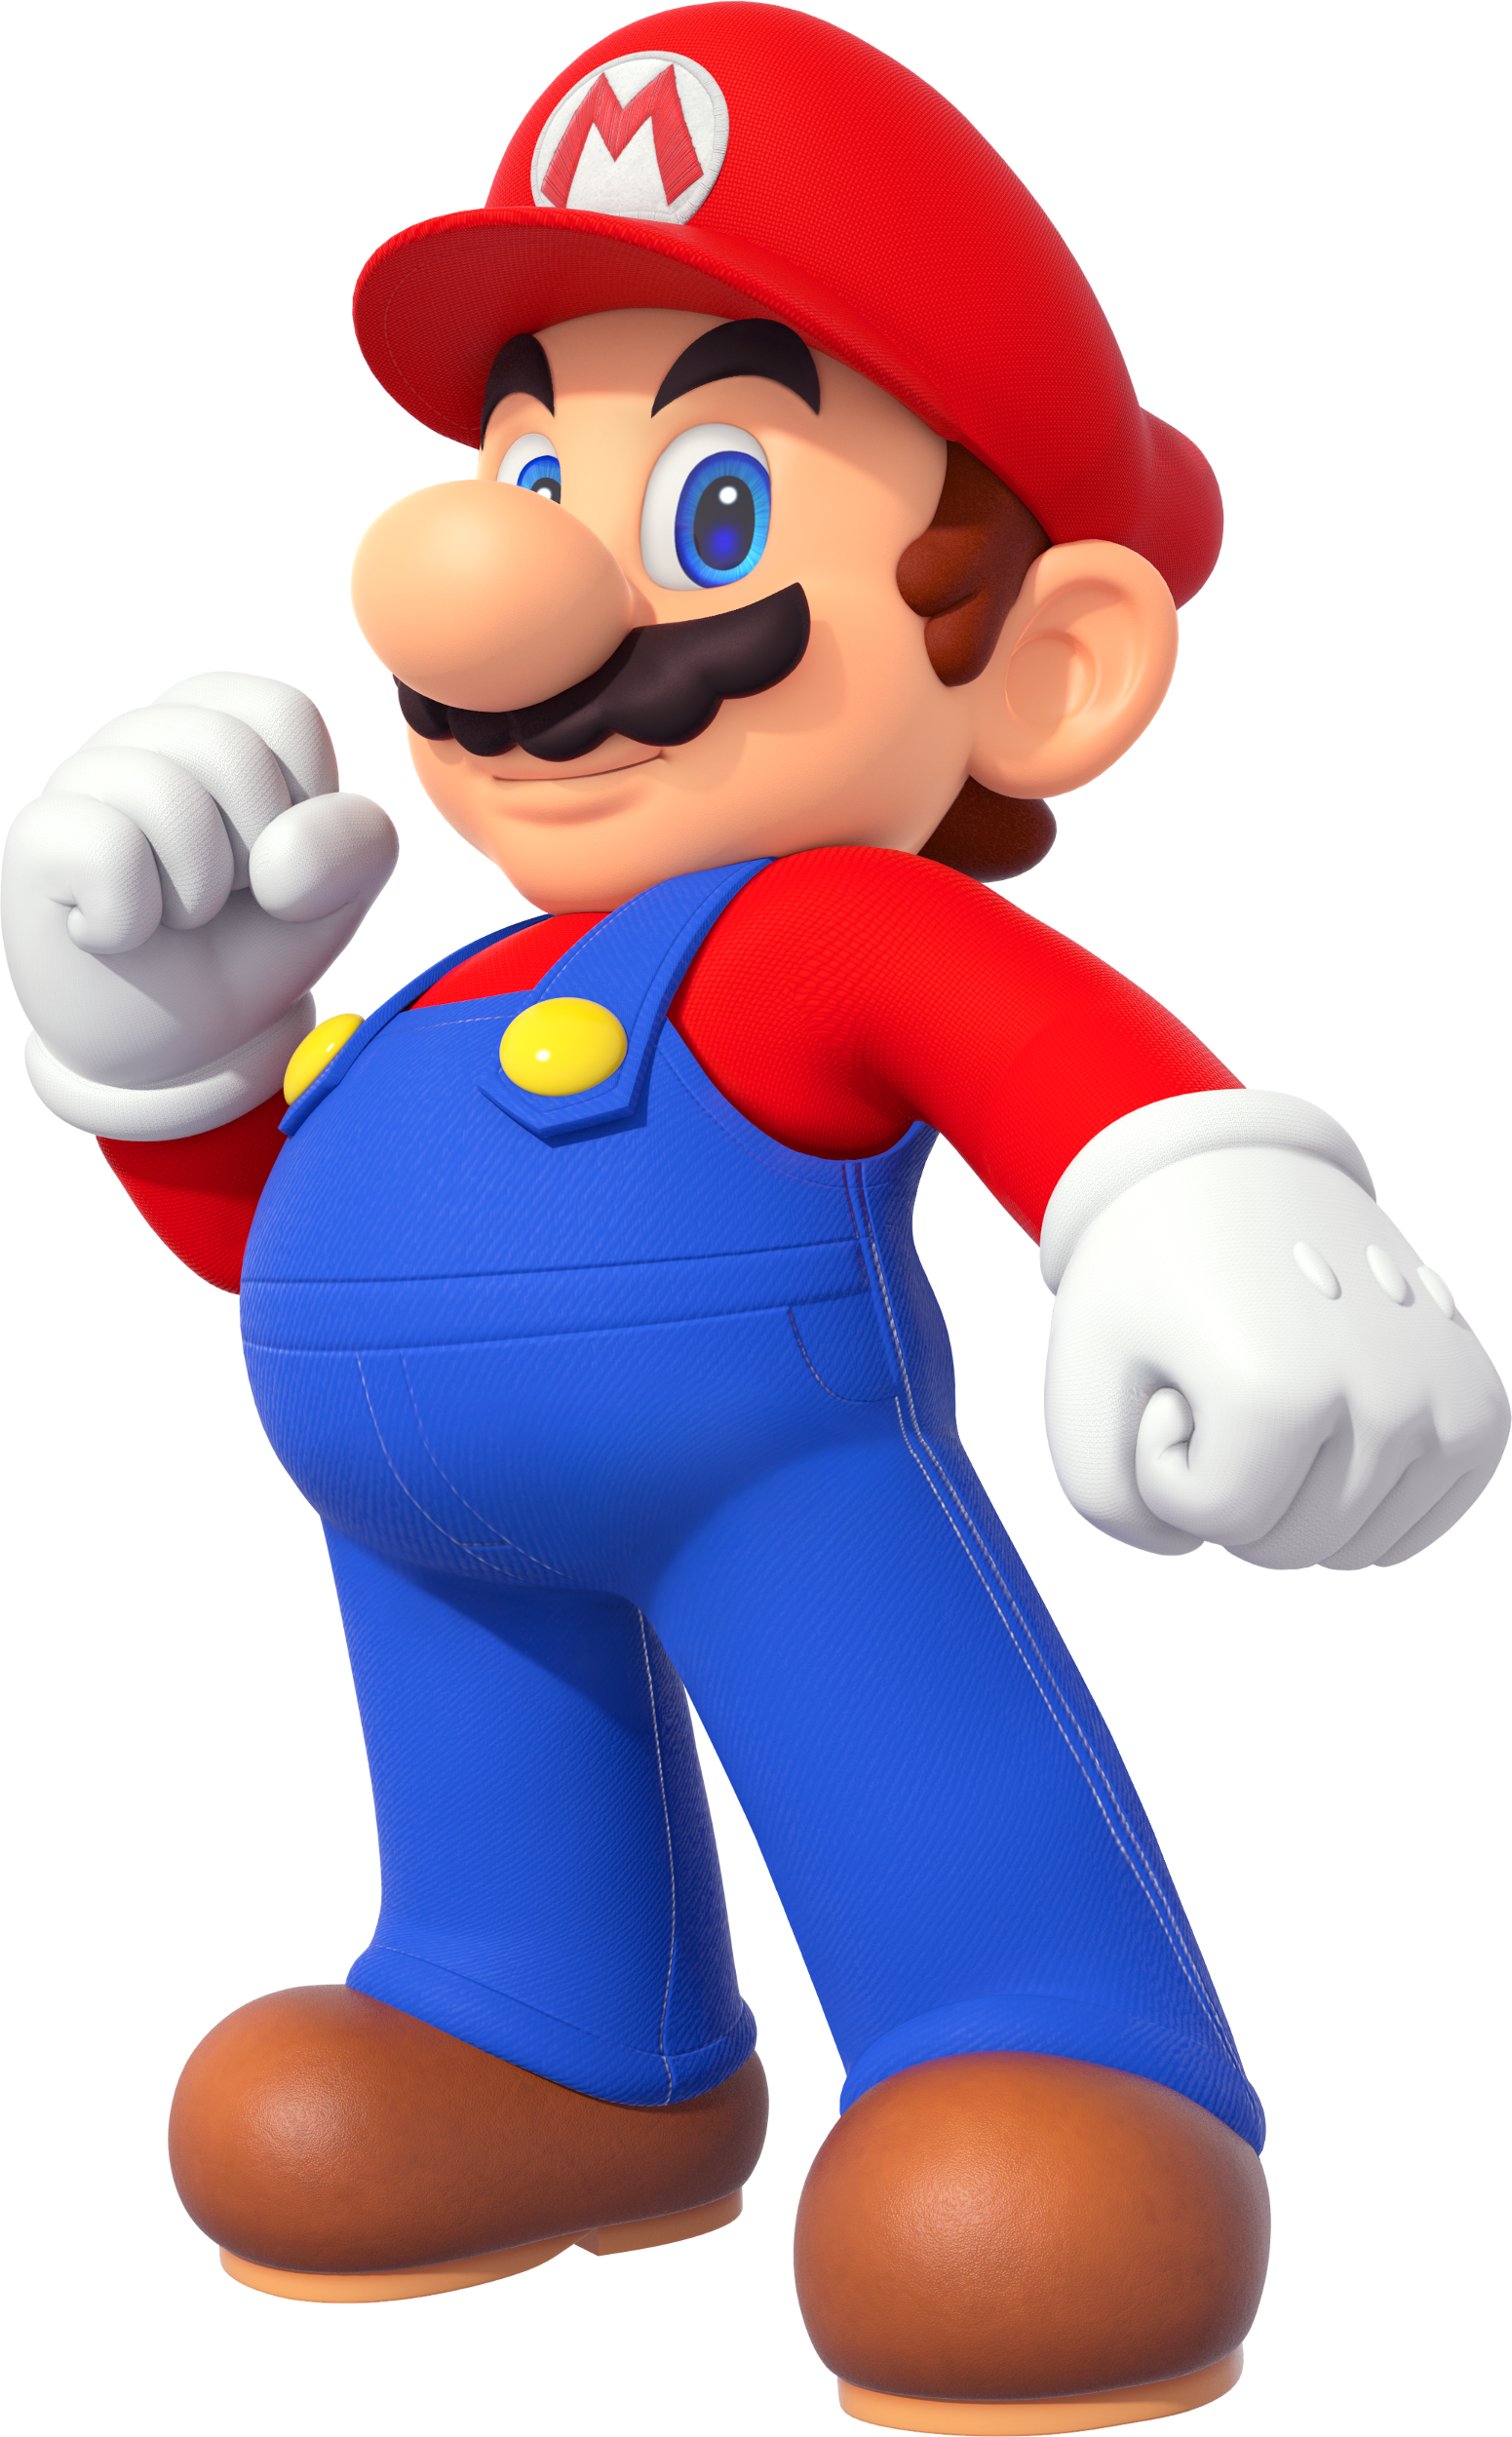 Image Mario Mp100png Mariowiki Fandom Powered By Wikia 